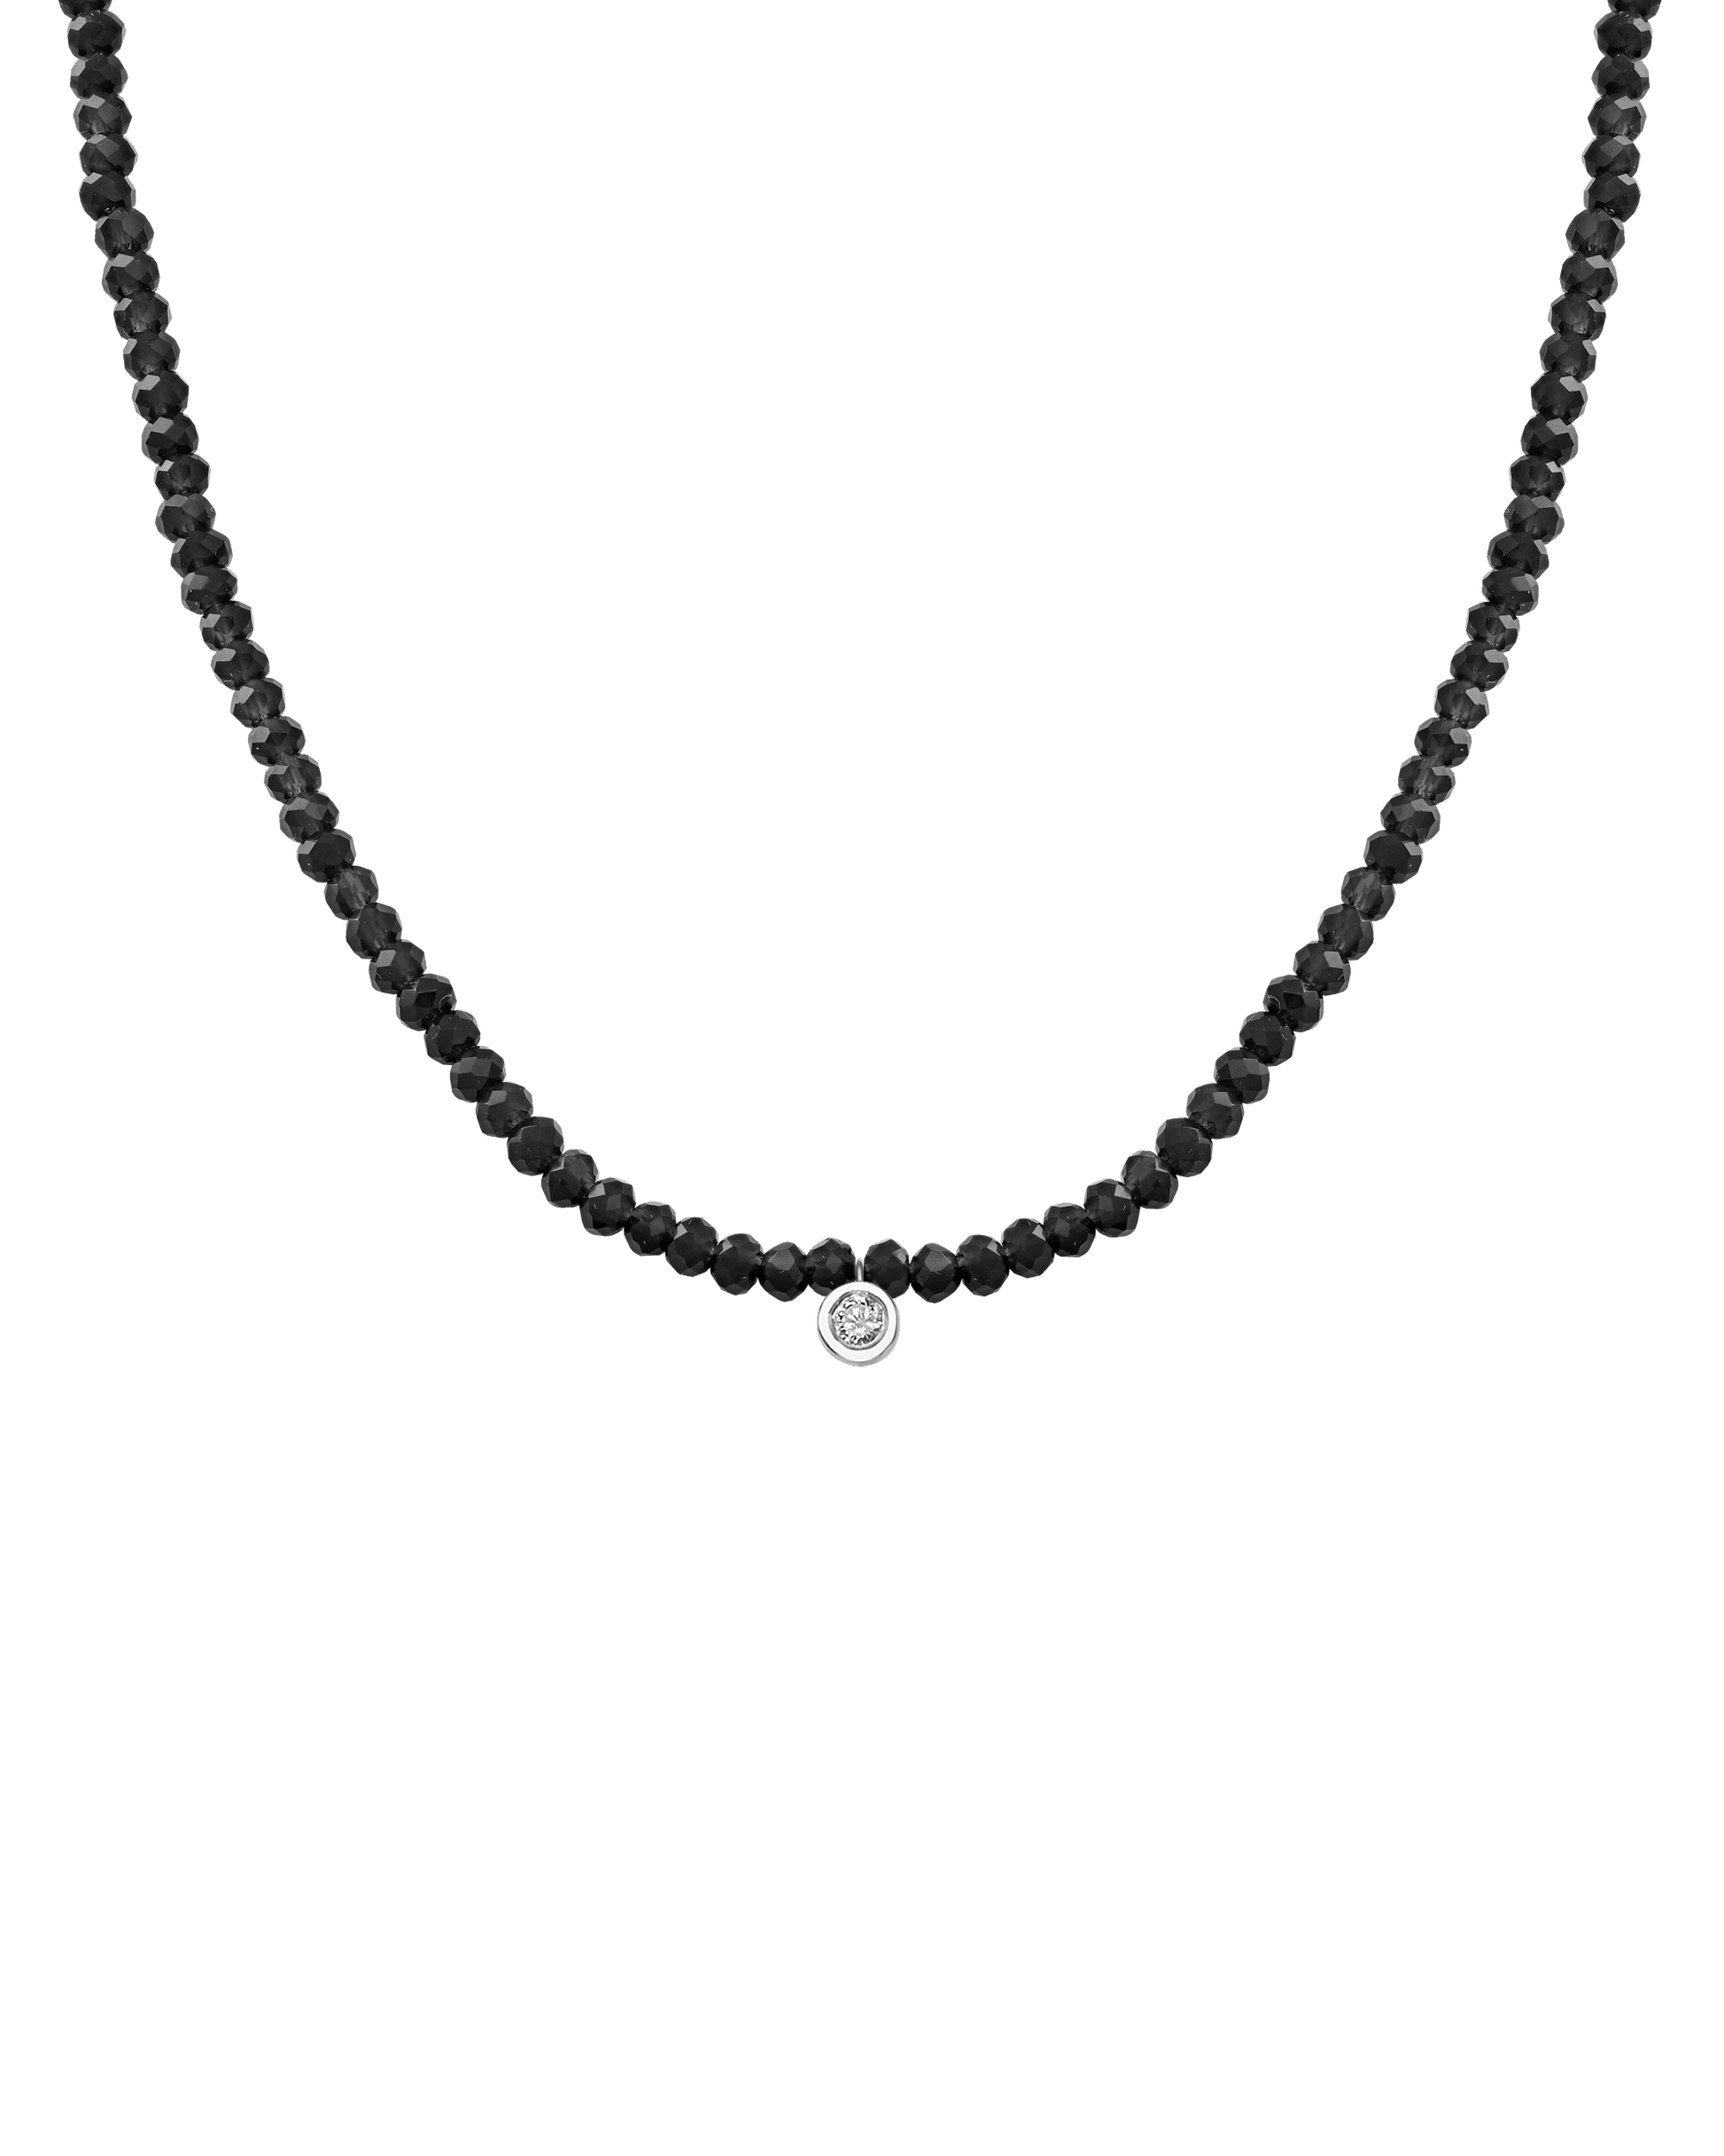 Apatite Gemstone & Diamond Necklace - 14K White Gold Necklaces 14K Solid Gold Glass Beads Black Spinnel Medium: 0.05ct 14"